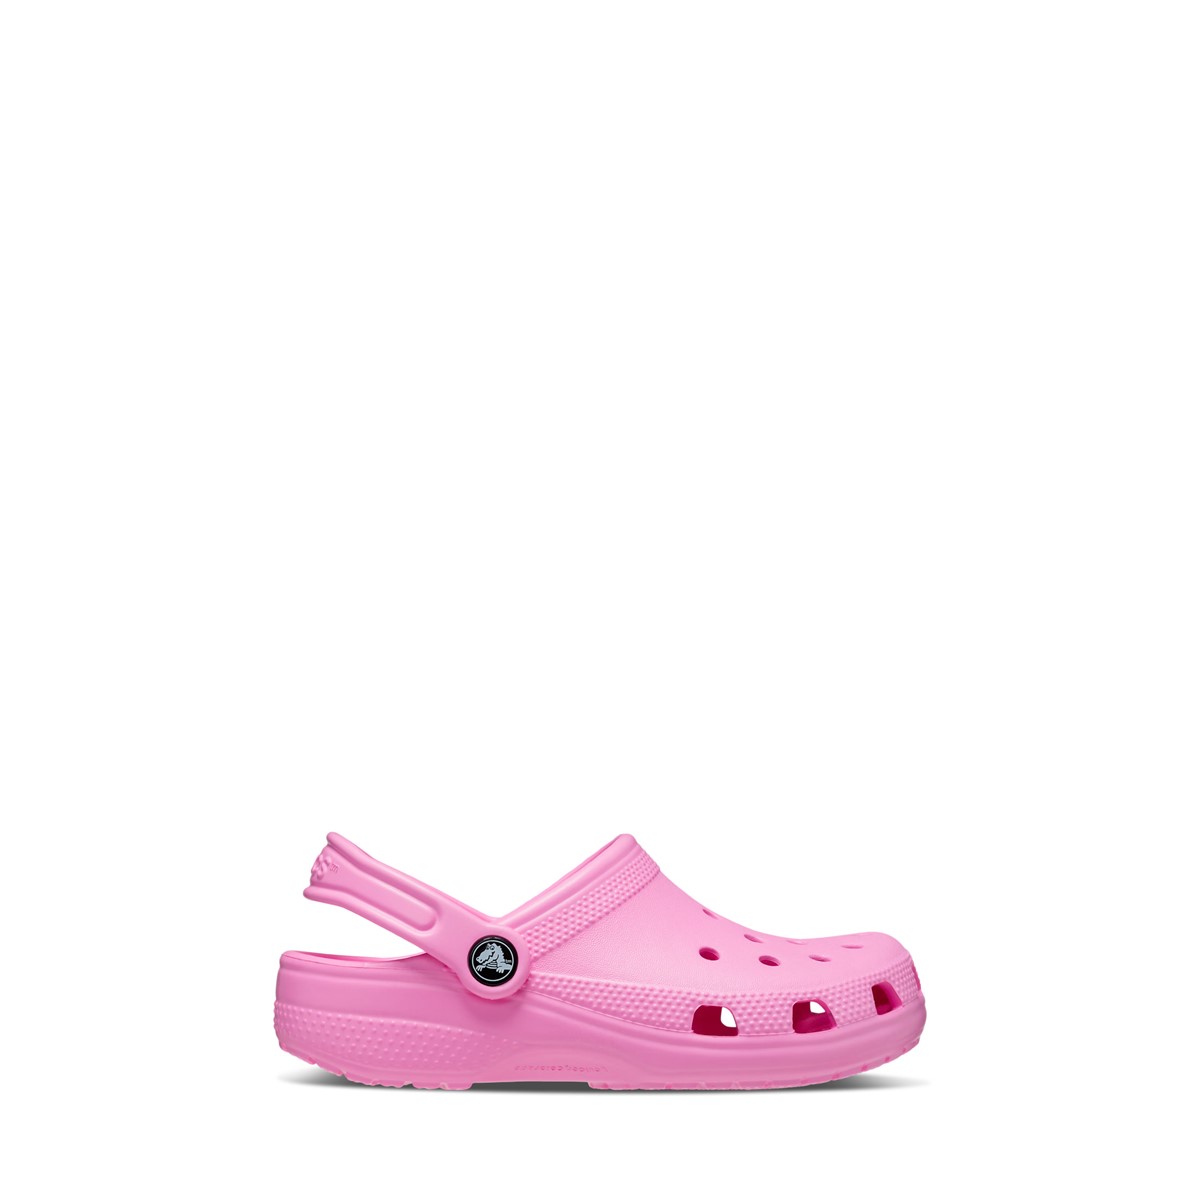 Toddler's Classic Clogs in Pink